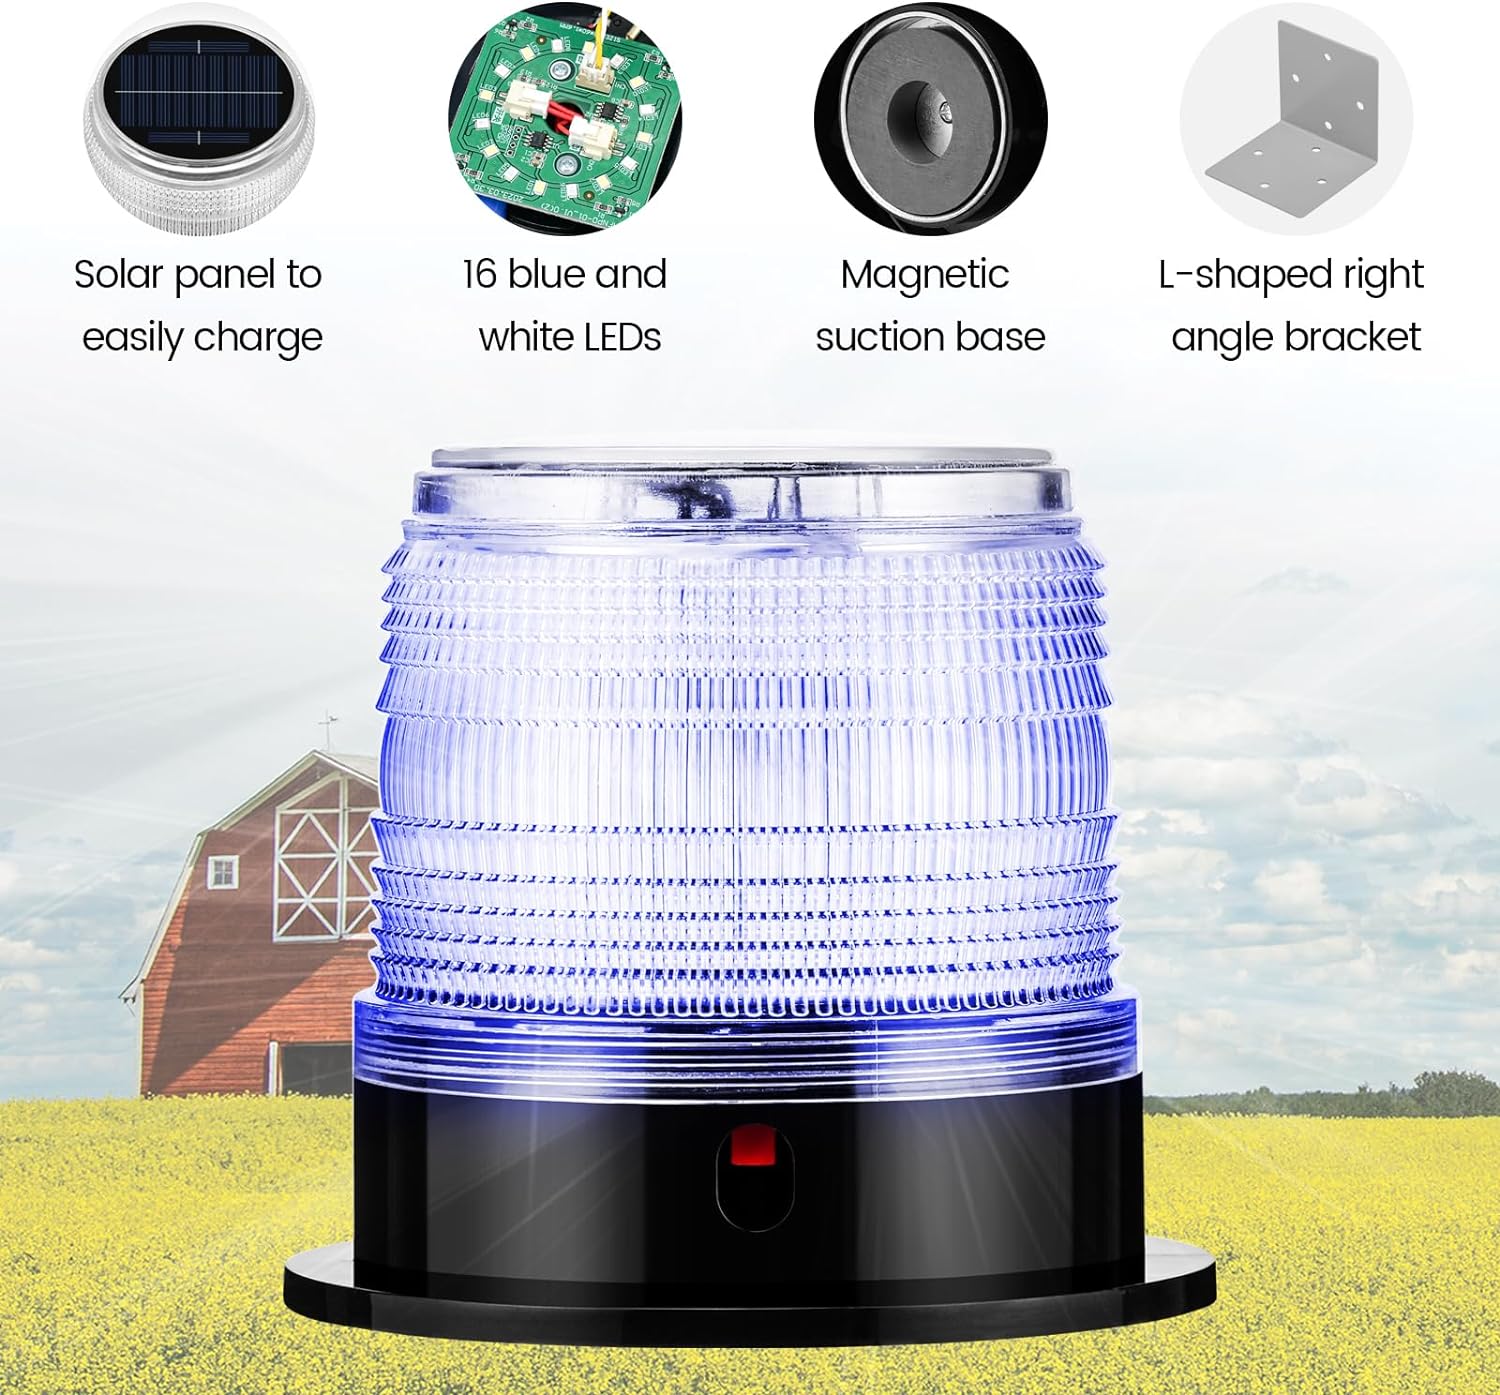 Night Predator Deterrent, Briidea Solar Predator Control Light with Batteries, 360° Highlighting LED Bright to 1.6KM Away, Automatic Turn On at Night, Protect Crops and Poultry